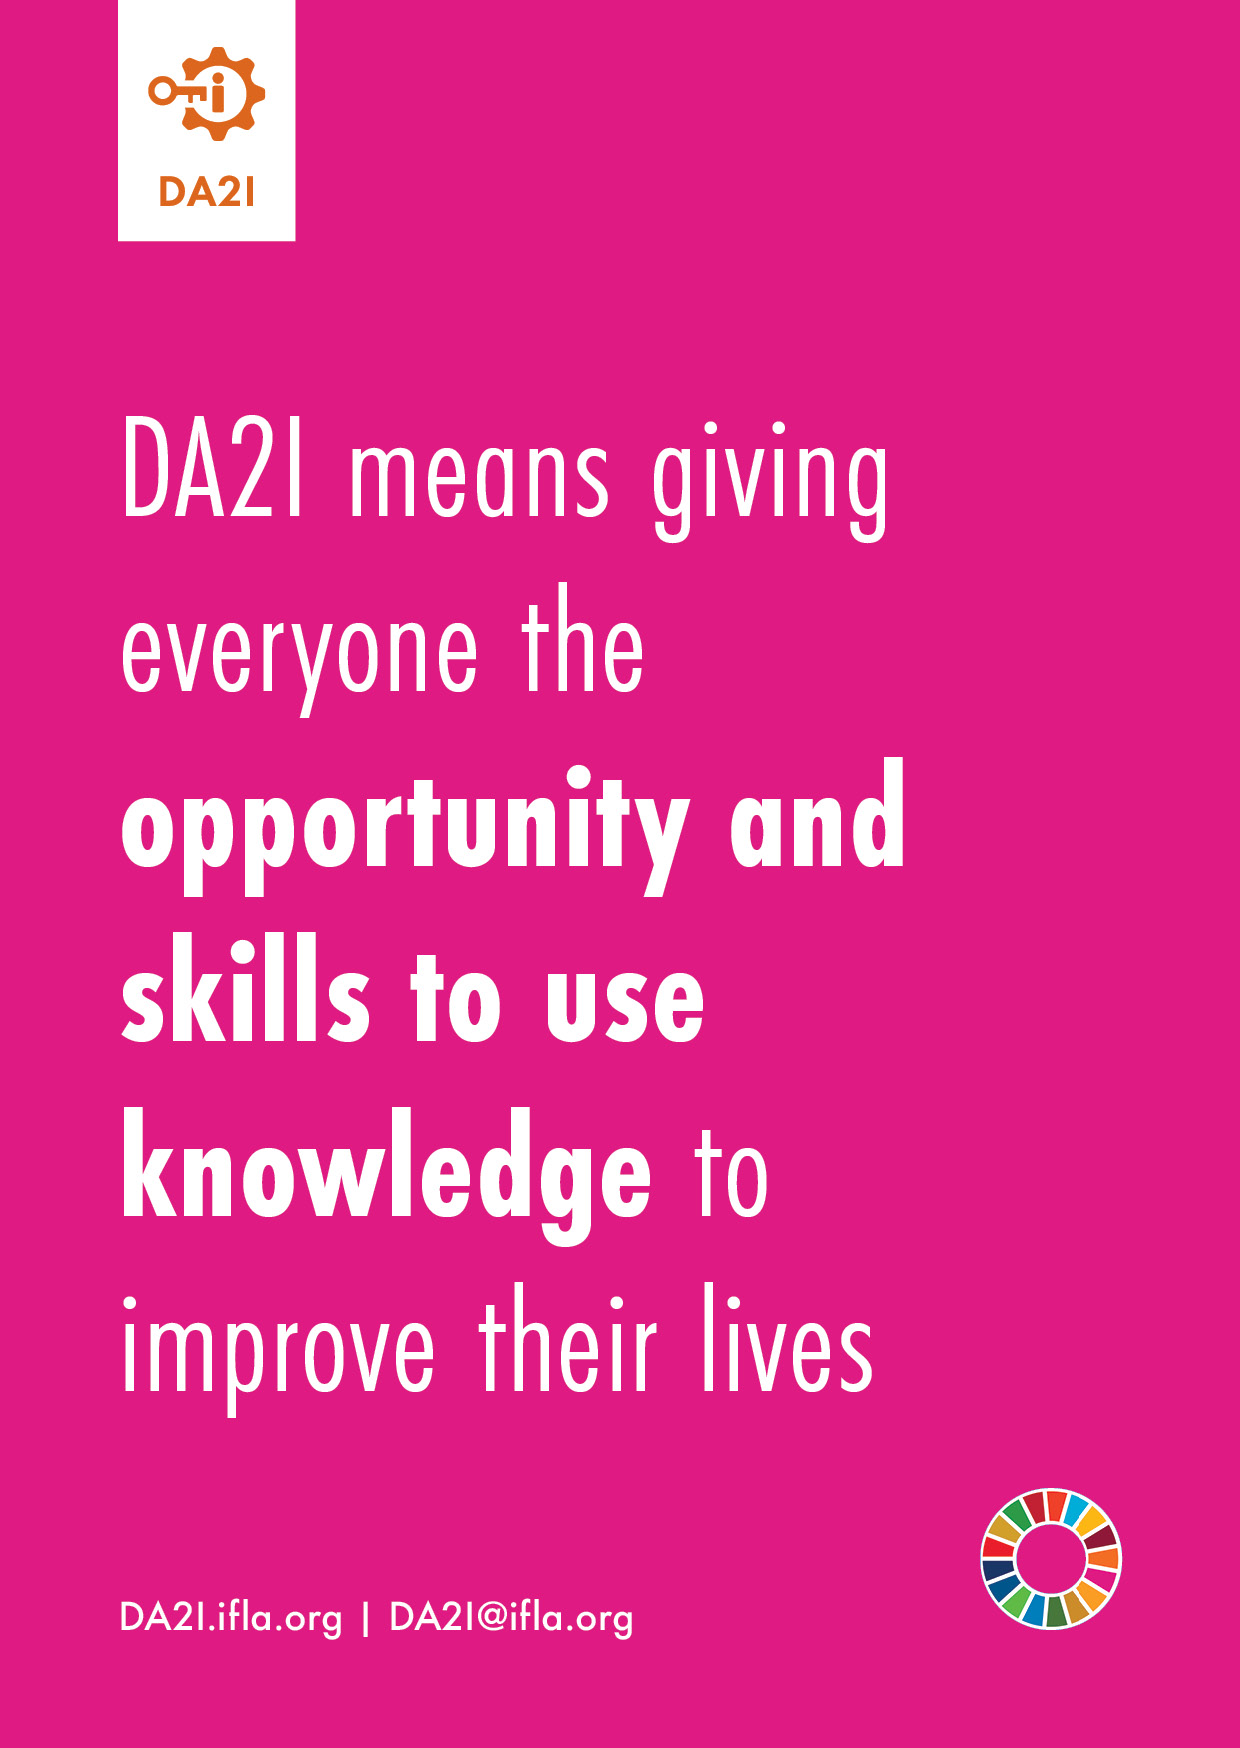 DA2I means giving everyone the opportunity and skills to use knowledge to improve their lives